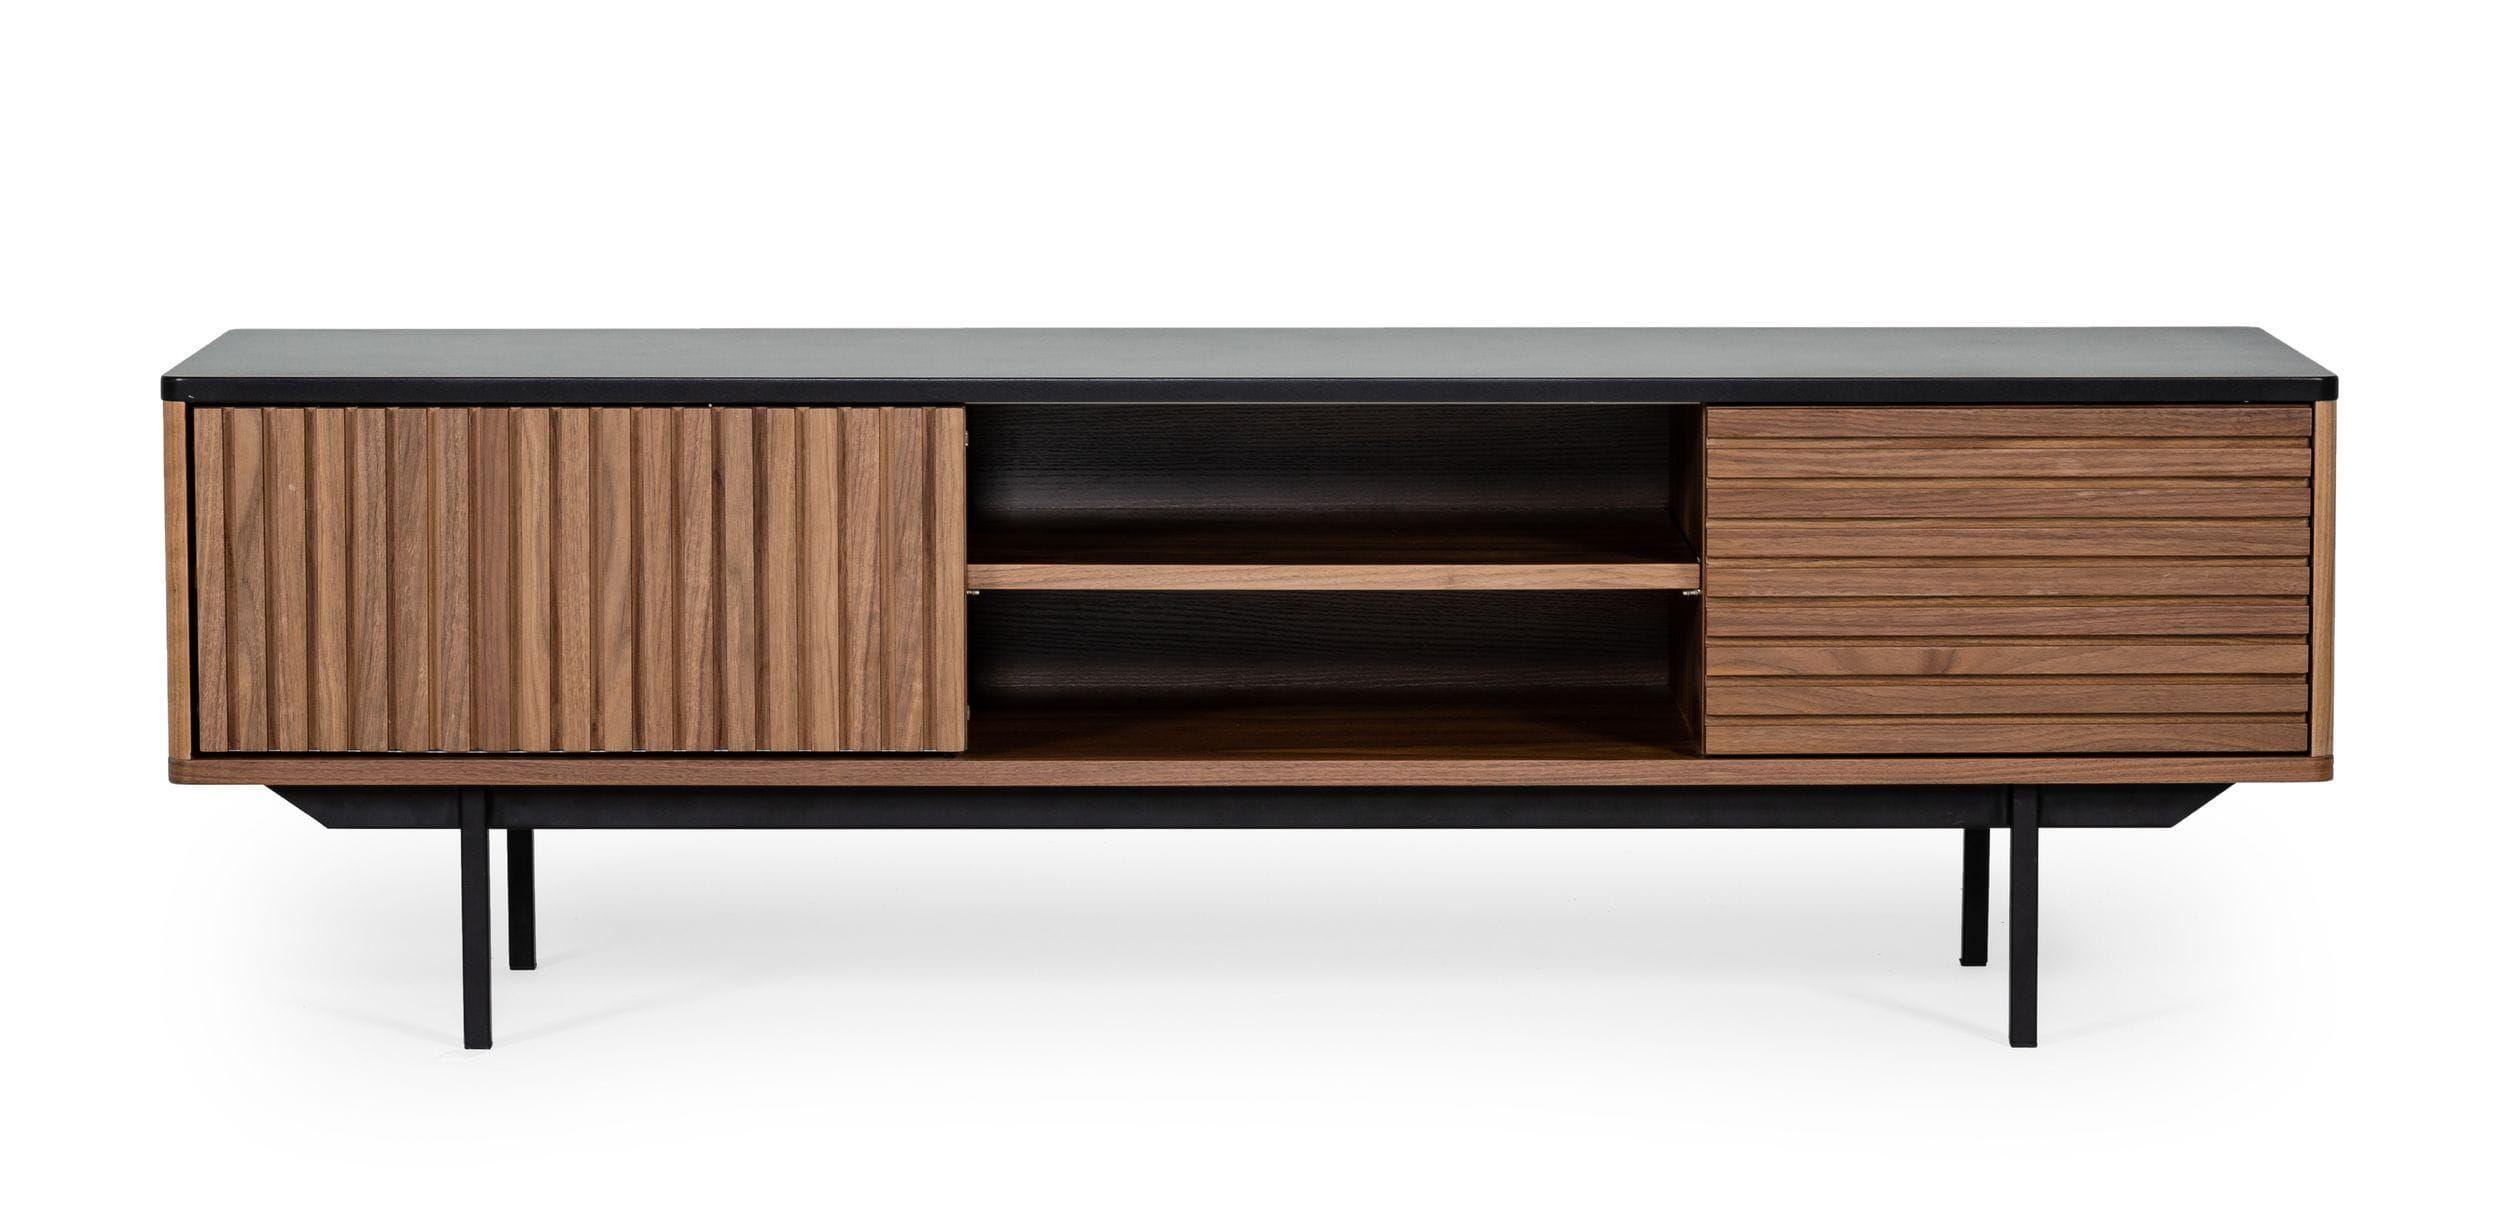 Contemporary, Modern TV Stand Maggie VGDWJ9715 in Walnut 